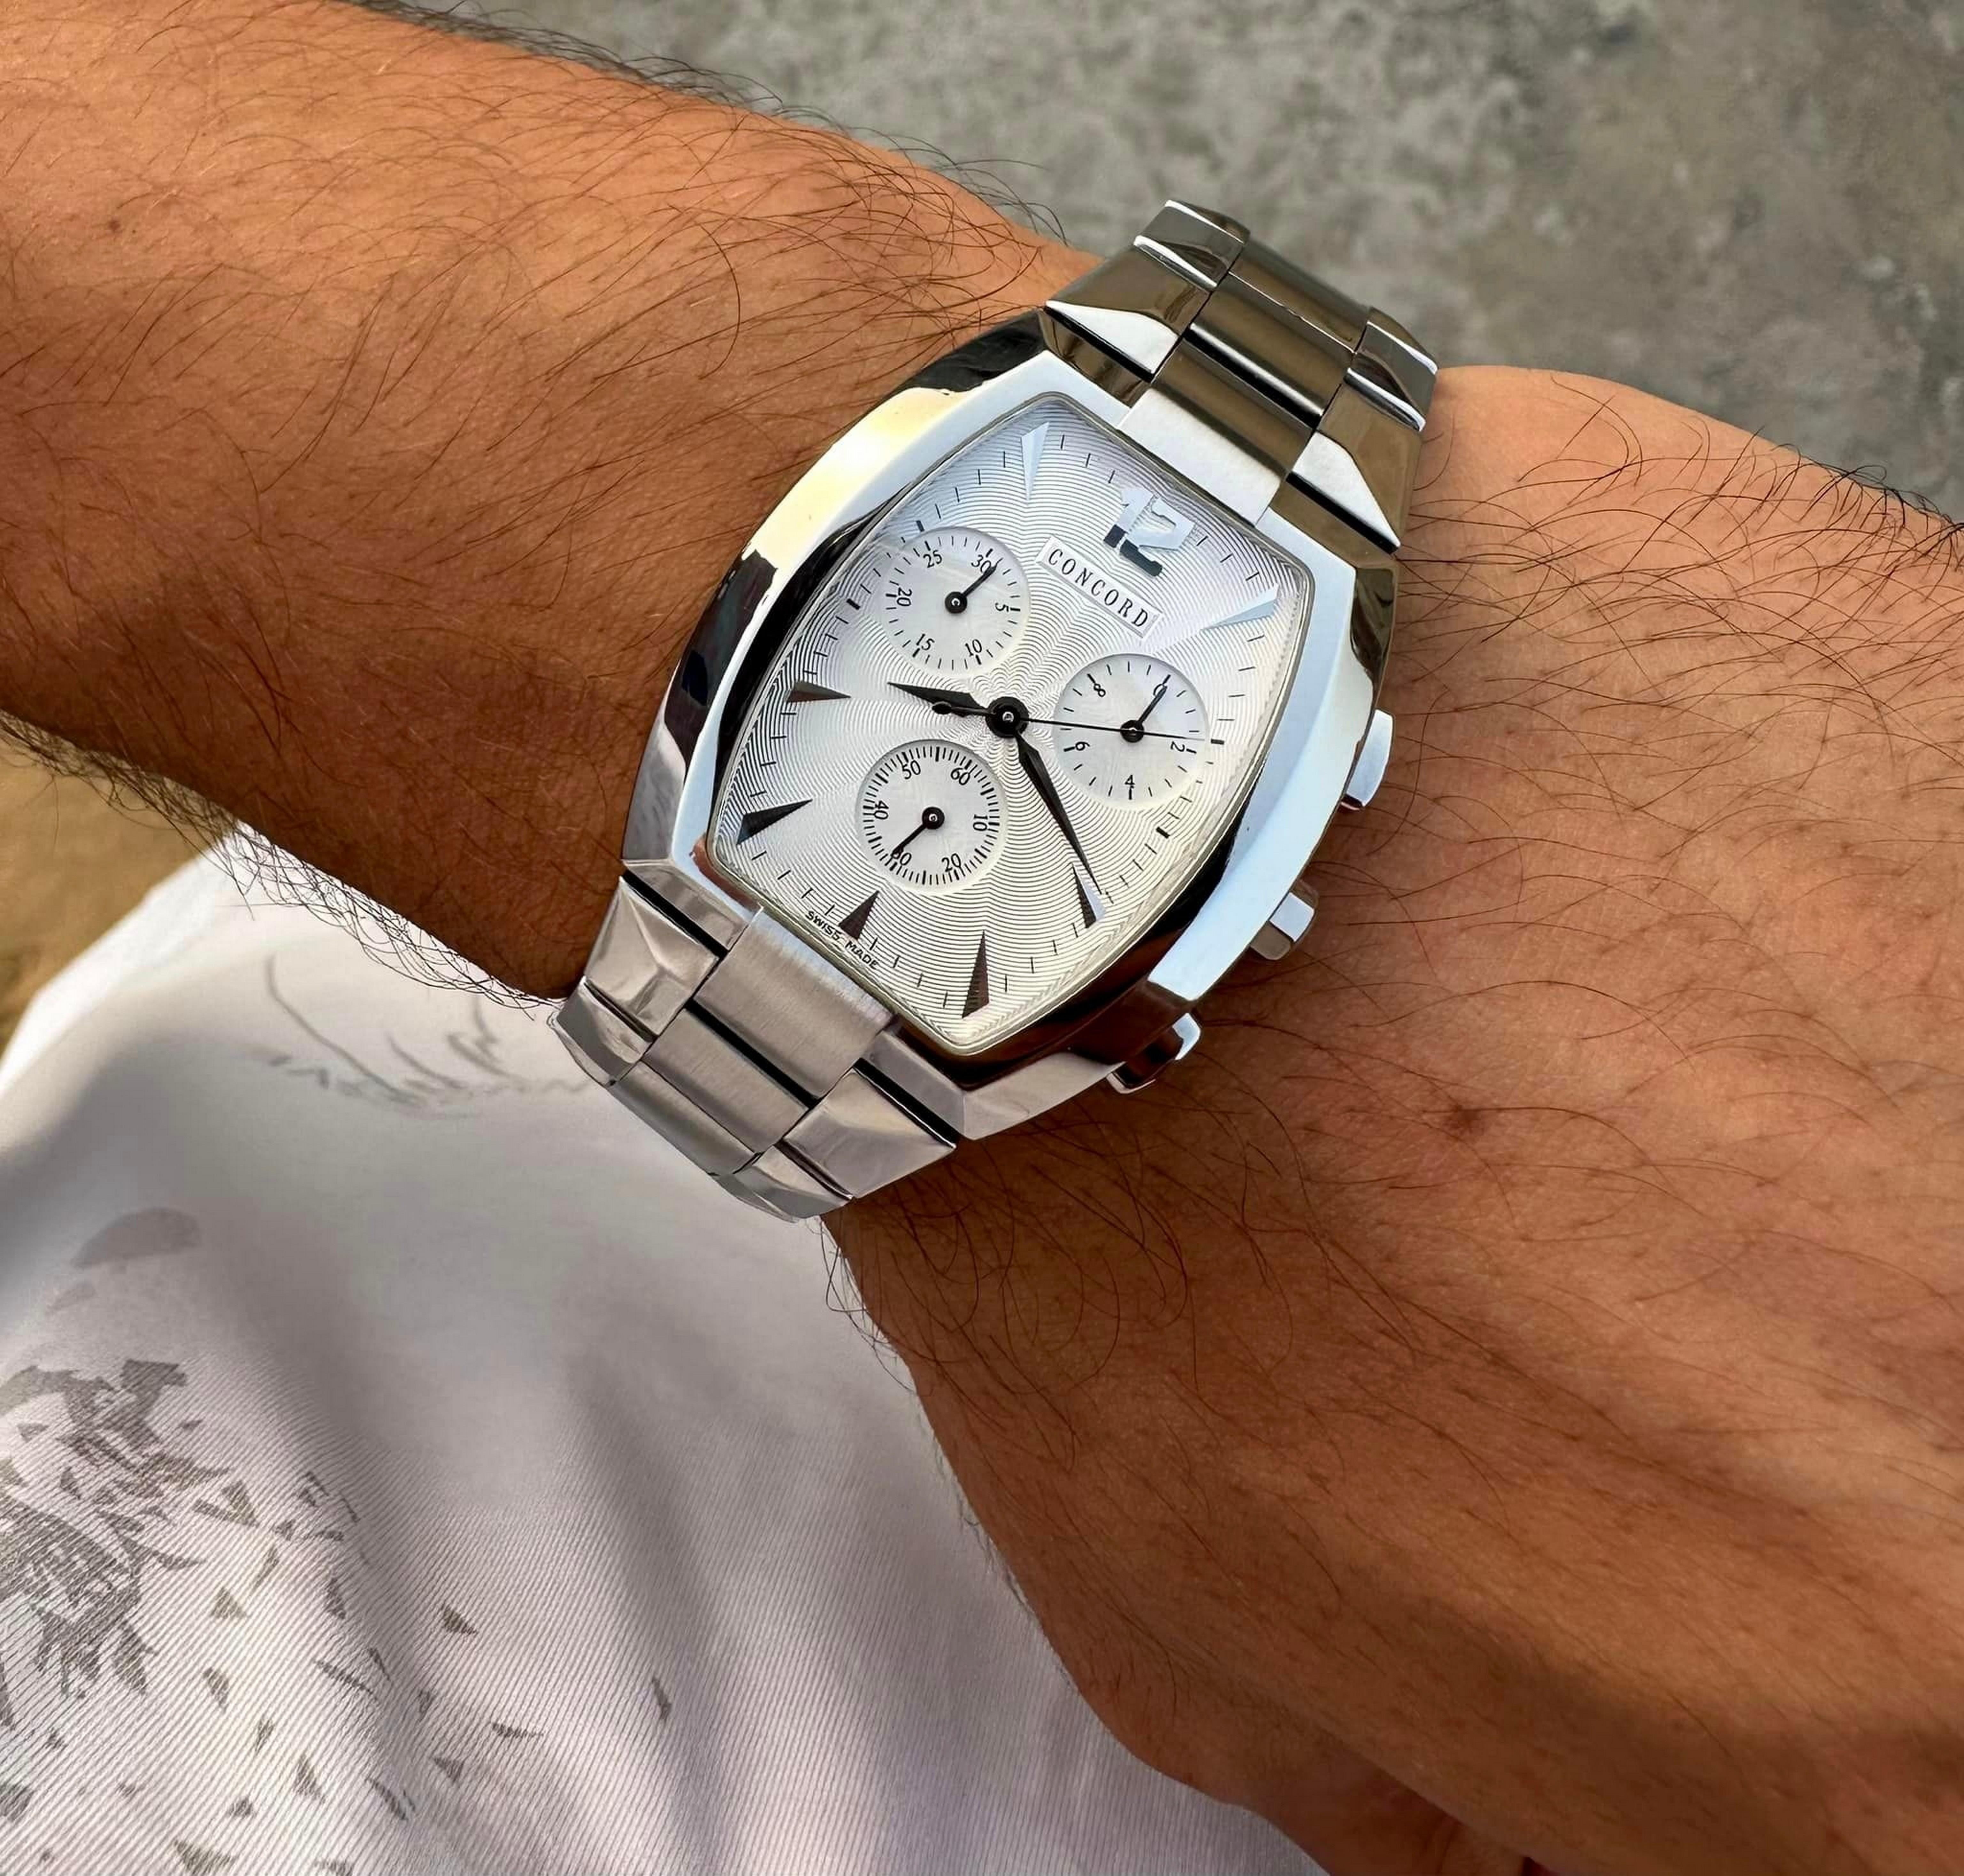 Brand: Concord

Model: La Scala

Reference Number: 14.H1.1481

Country Of Manufacture: Switzerland

Movement: Quartz

Case Material: Stainless steel

Measurements : 39mm x 33 mm. (without crown)

Band Type : Stainless steel

Band Condition : In